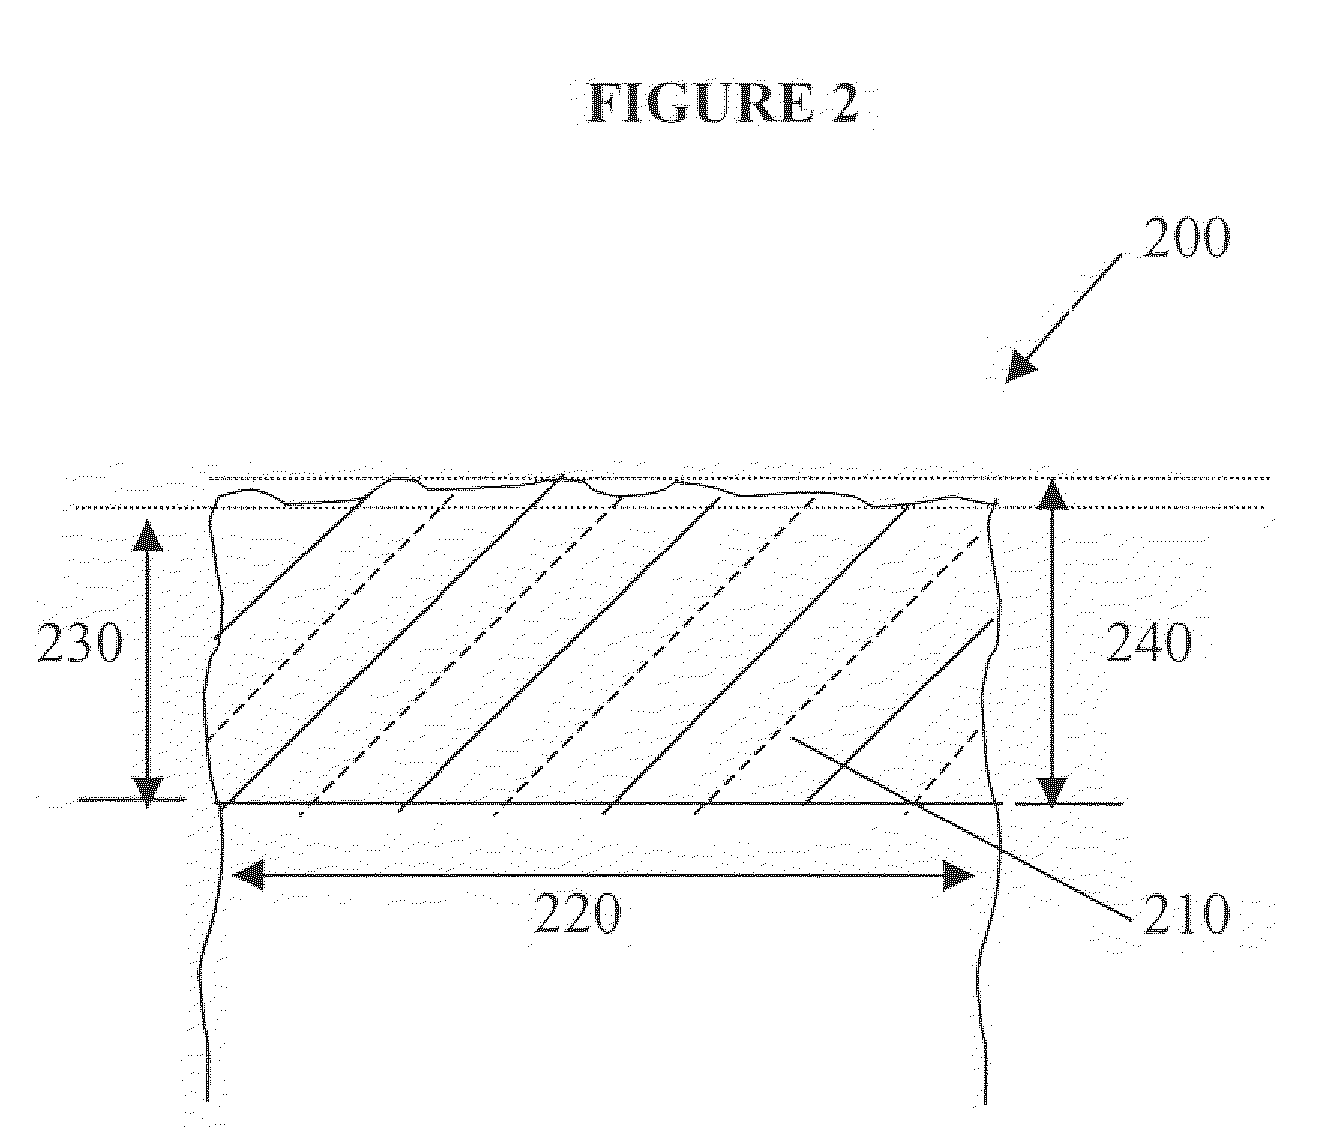 Thin Films and Methods of Making Them